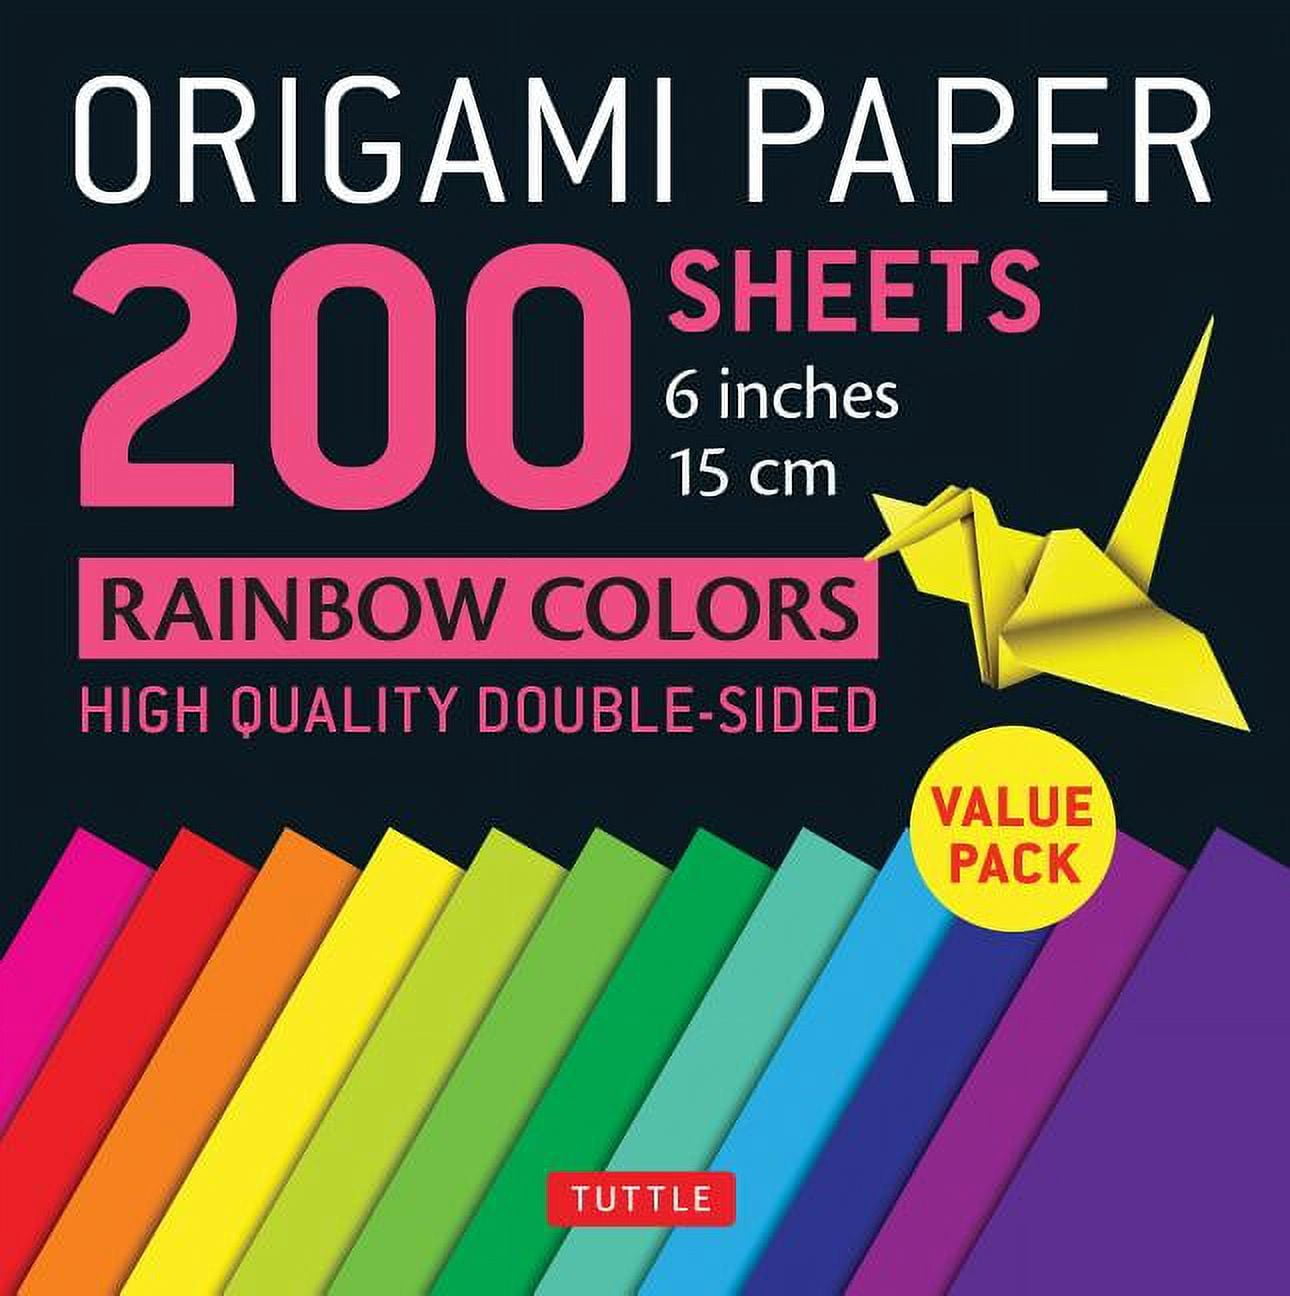 Origami Butterflies Kit: Kit Includes 2 Origami Books, 12 Fun Projects, 98  Origami Papers and Instructional DVD: Great for Both Kids and Adults [With  (Other)